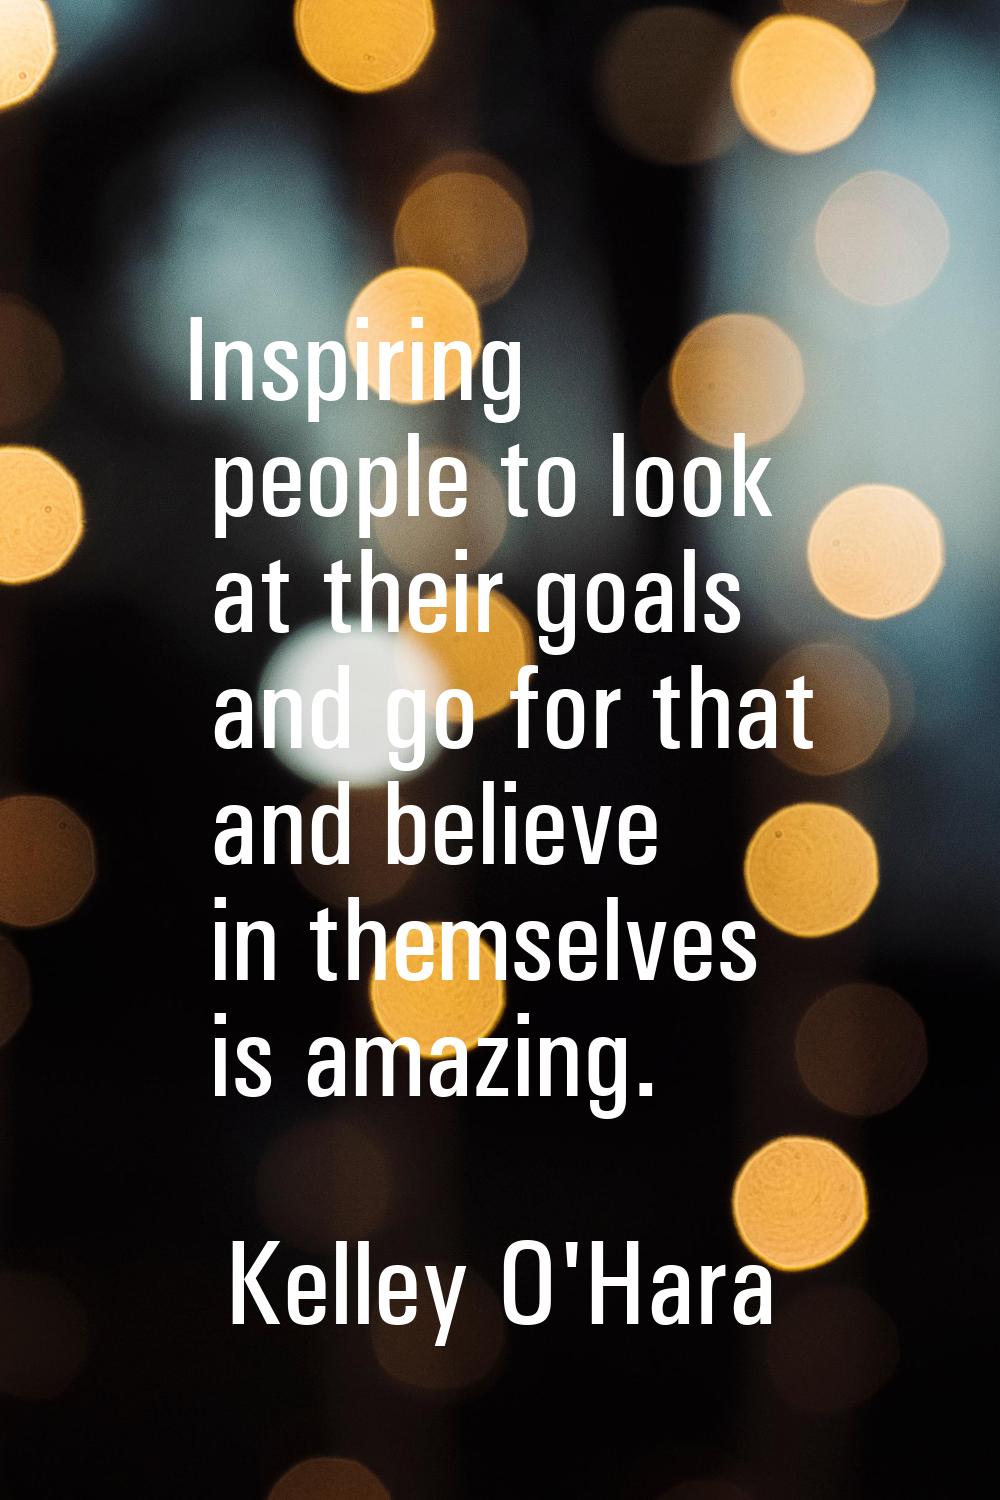 Inspiring people to look at their goals and go for that and believe in themselves is amazing.